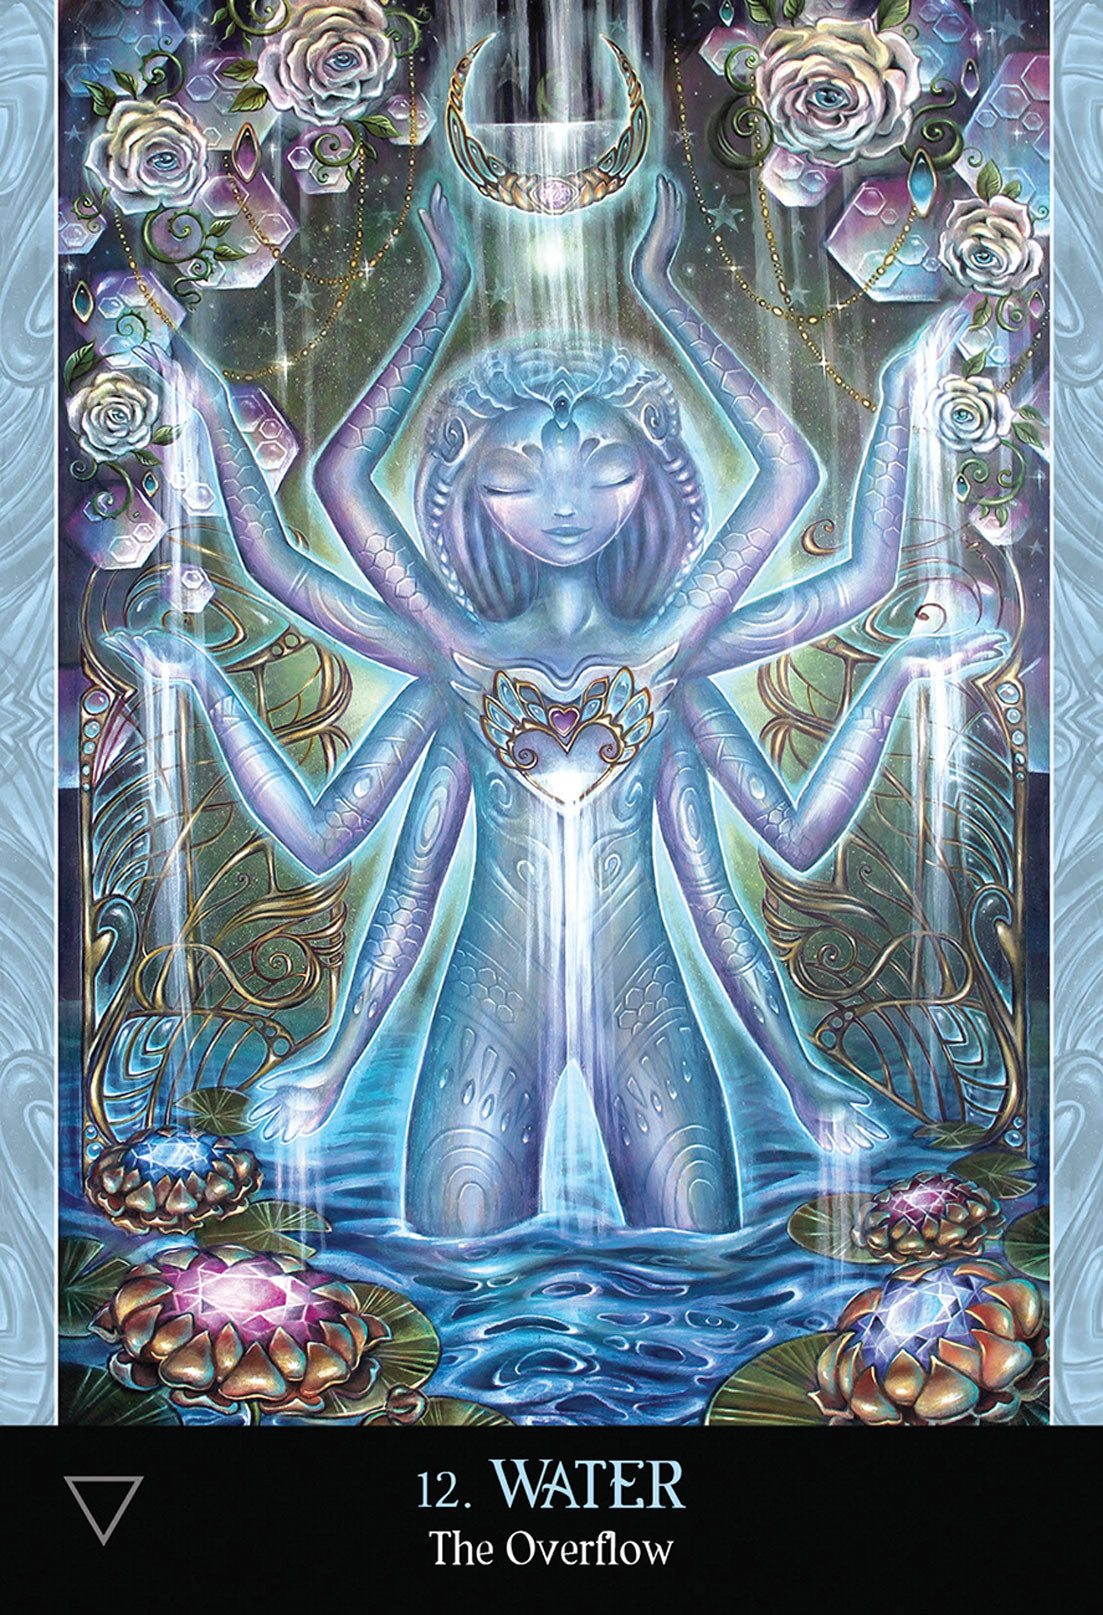 card labeled "water - the overflow." card depicts an eight-armed blue goddess. A crescent moon hangs above her head, and water is falling from her hands.